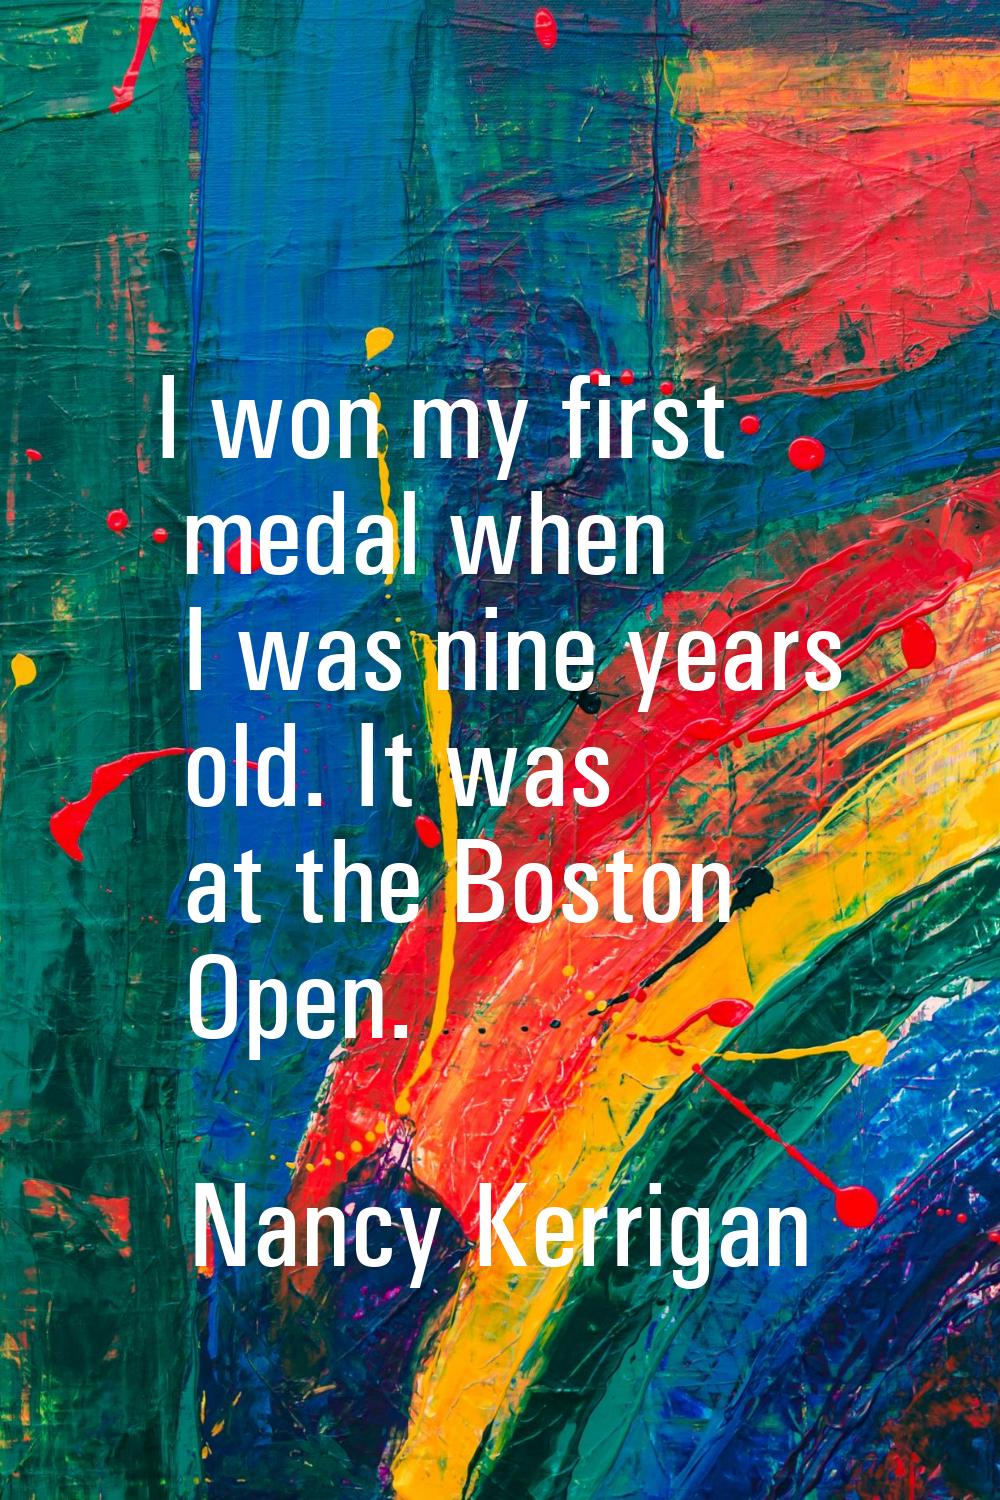 I won my first medal when I was nine years old. It was at the Boston Open.